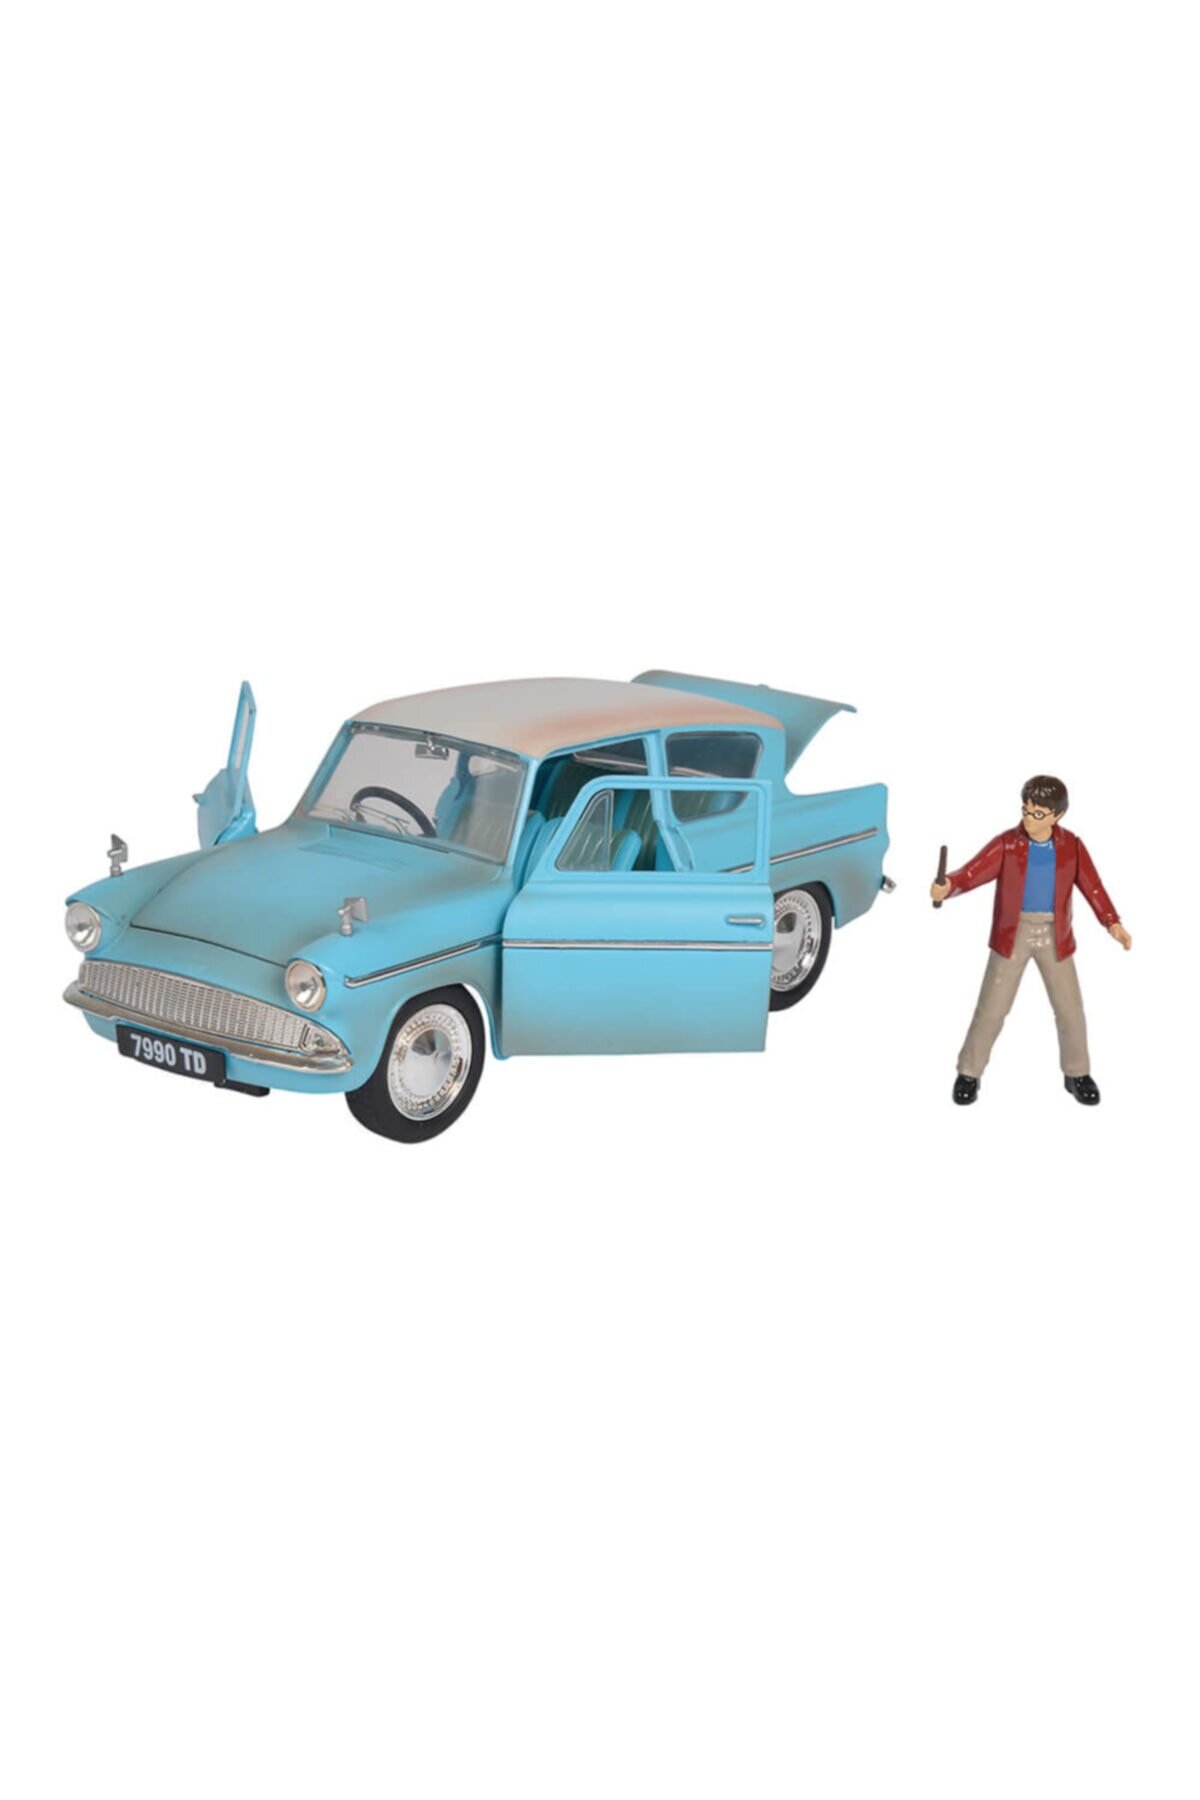 Harry Potter 1959 Ford Anglia 1 24